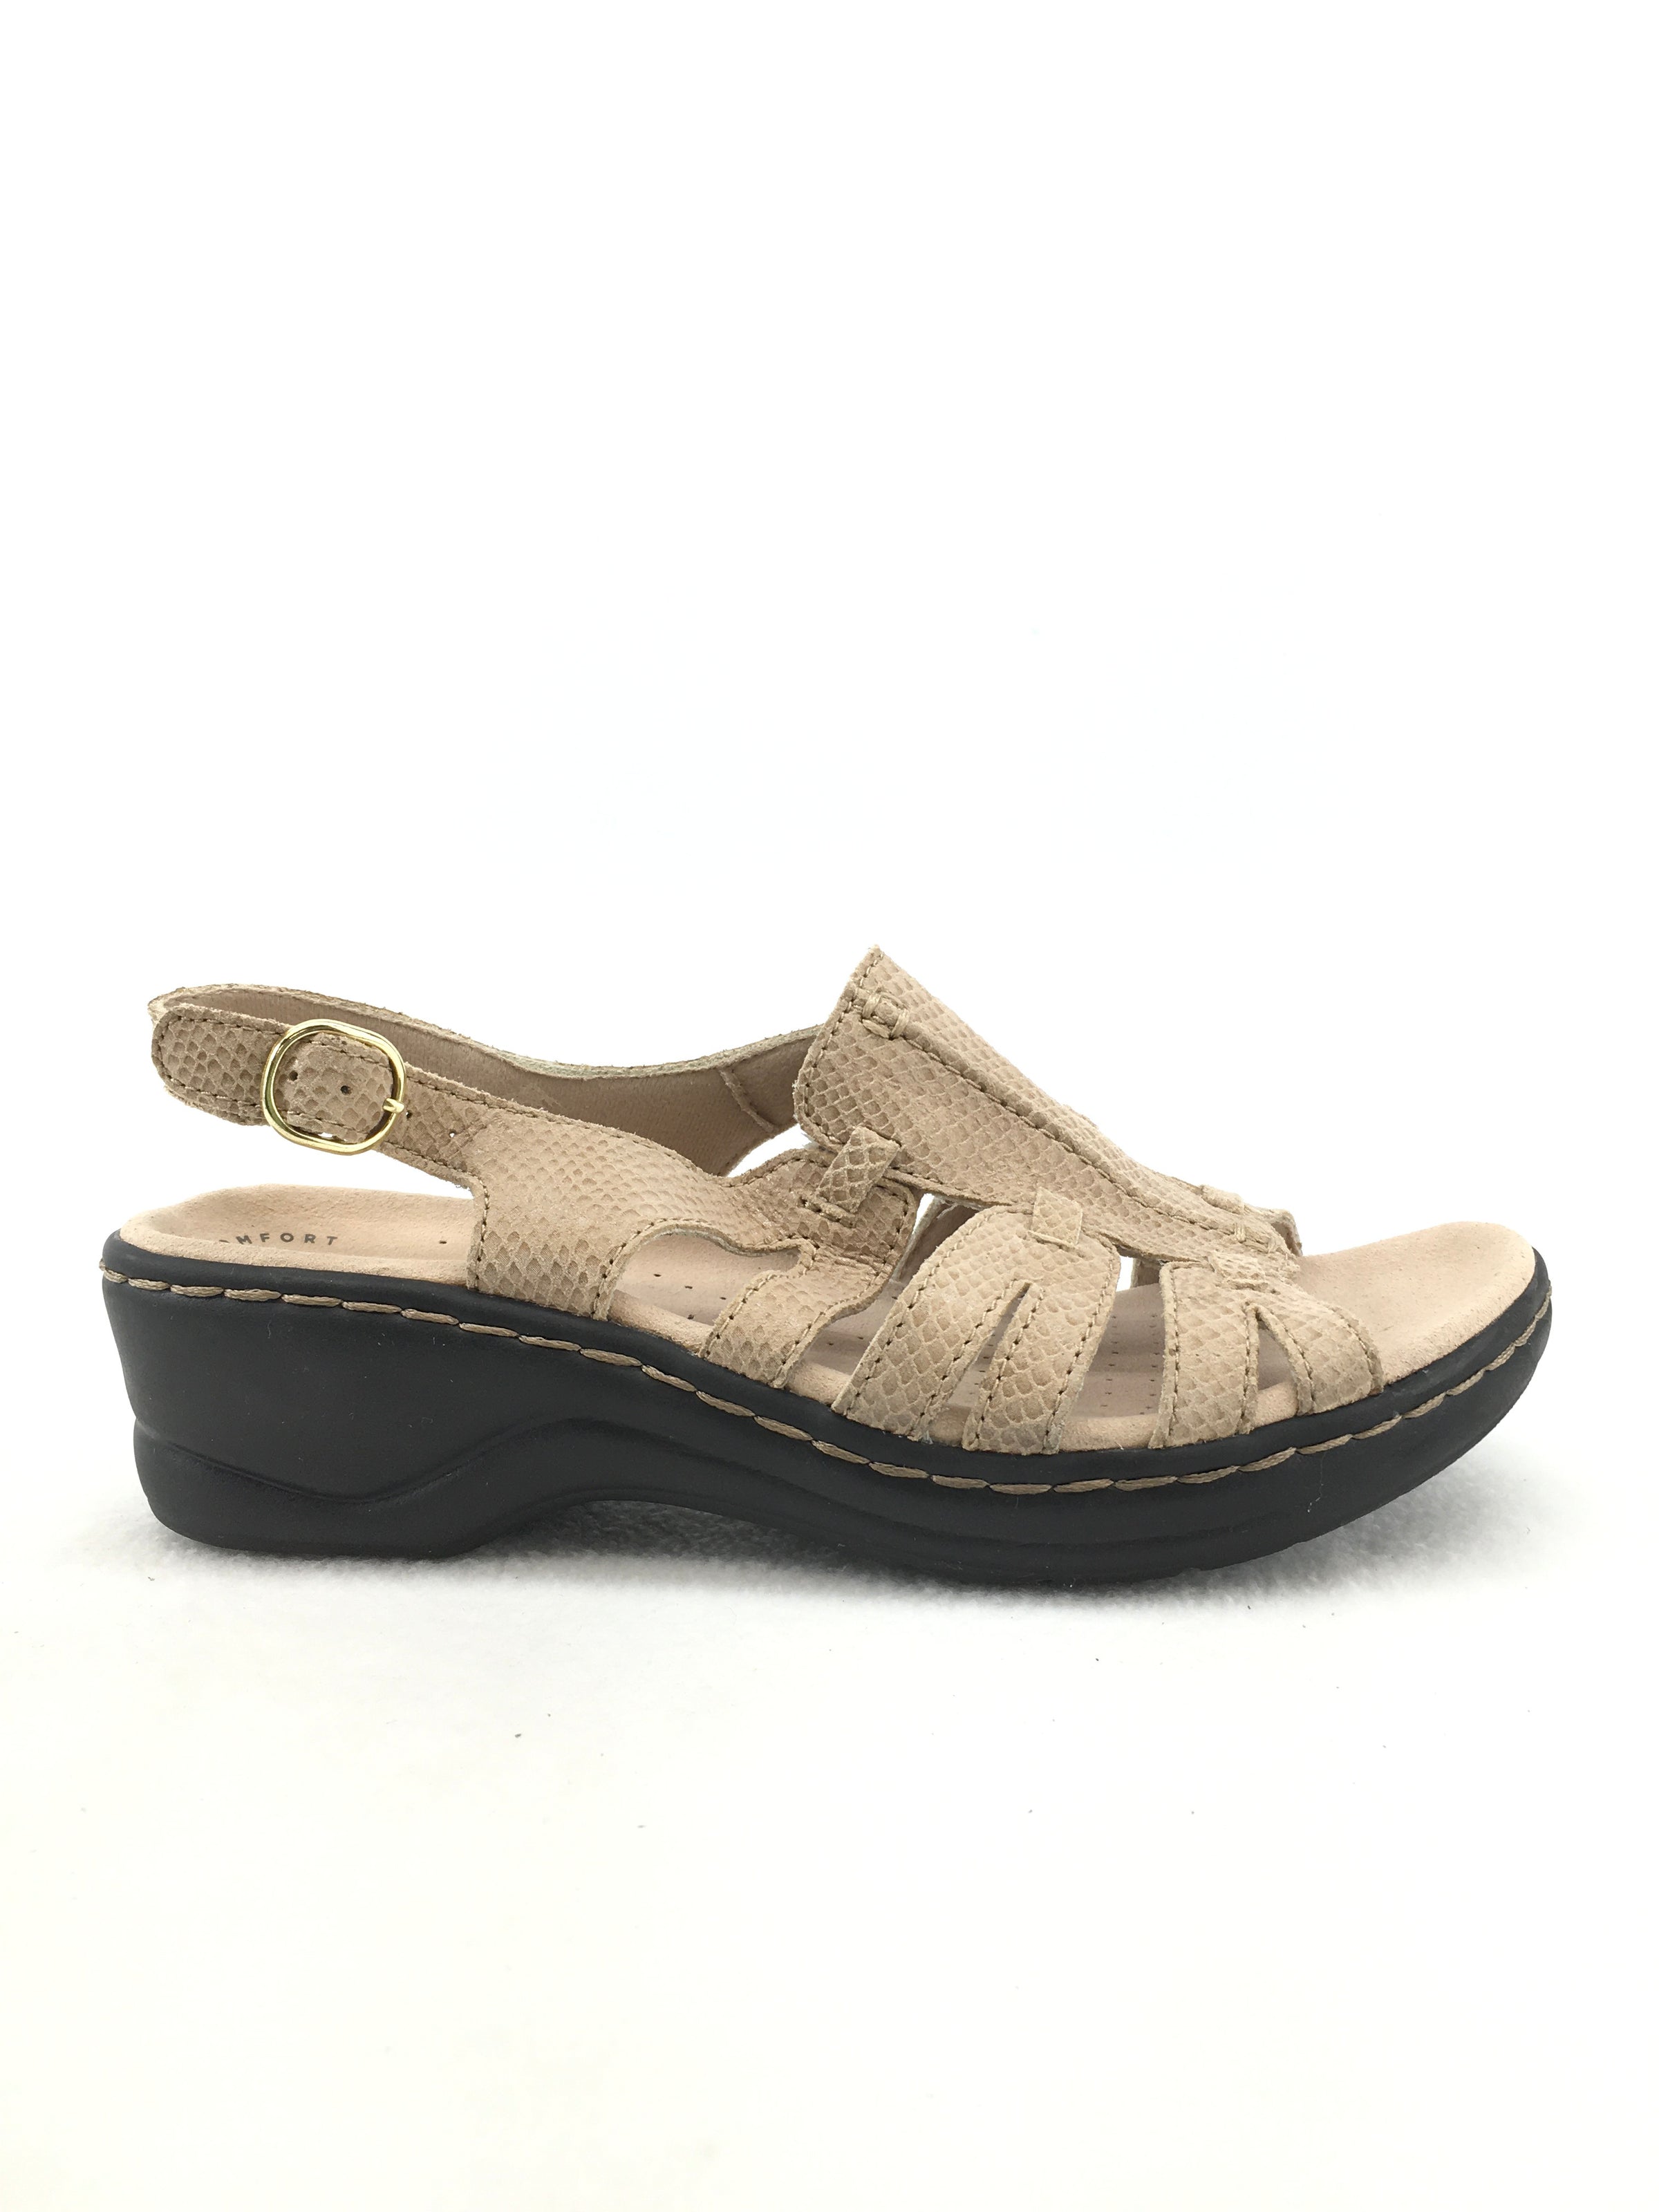 Collection by Clarks Comfort Sandals Size 6M